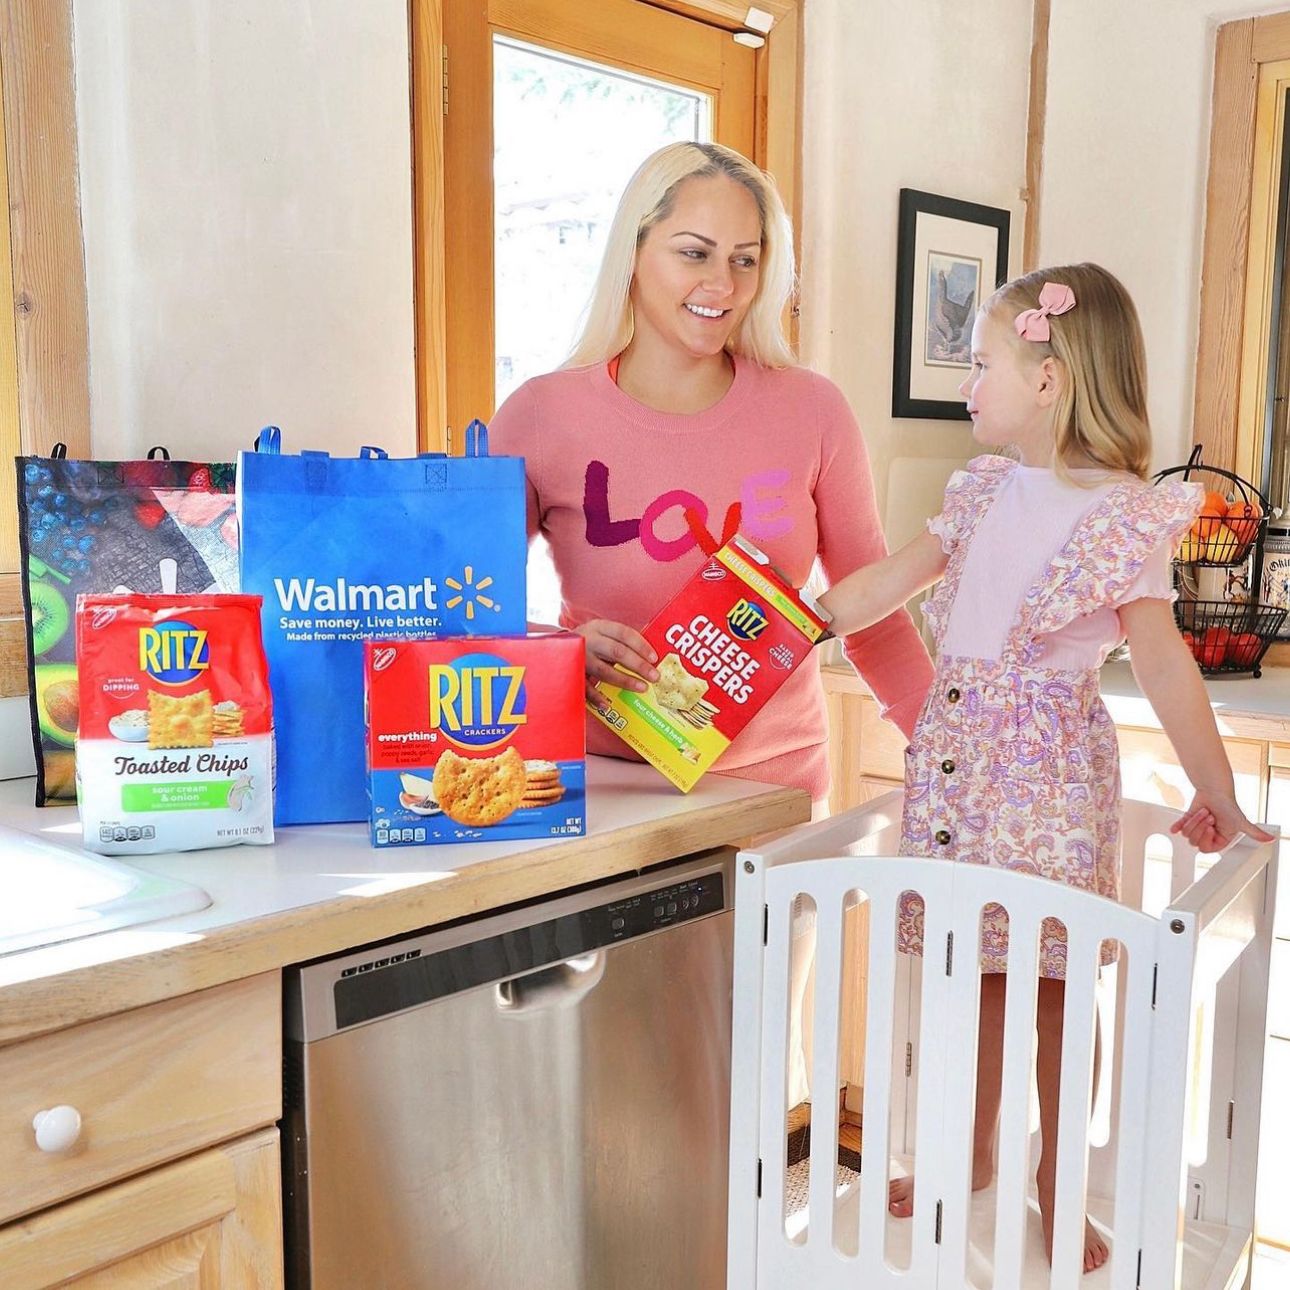 Ritz Crackers for feed the children foundation